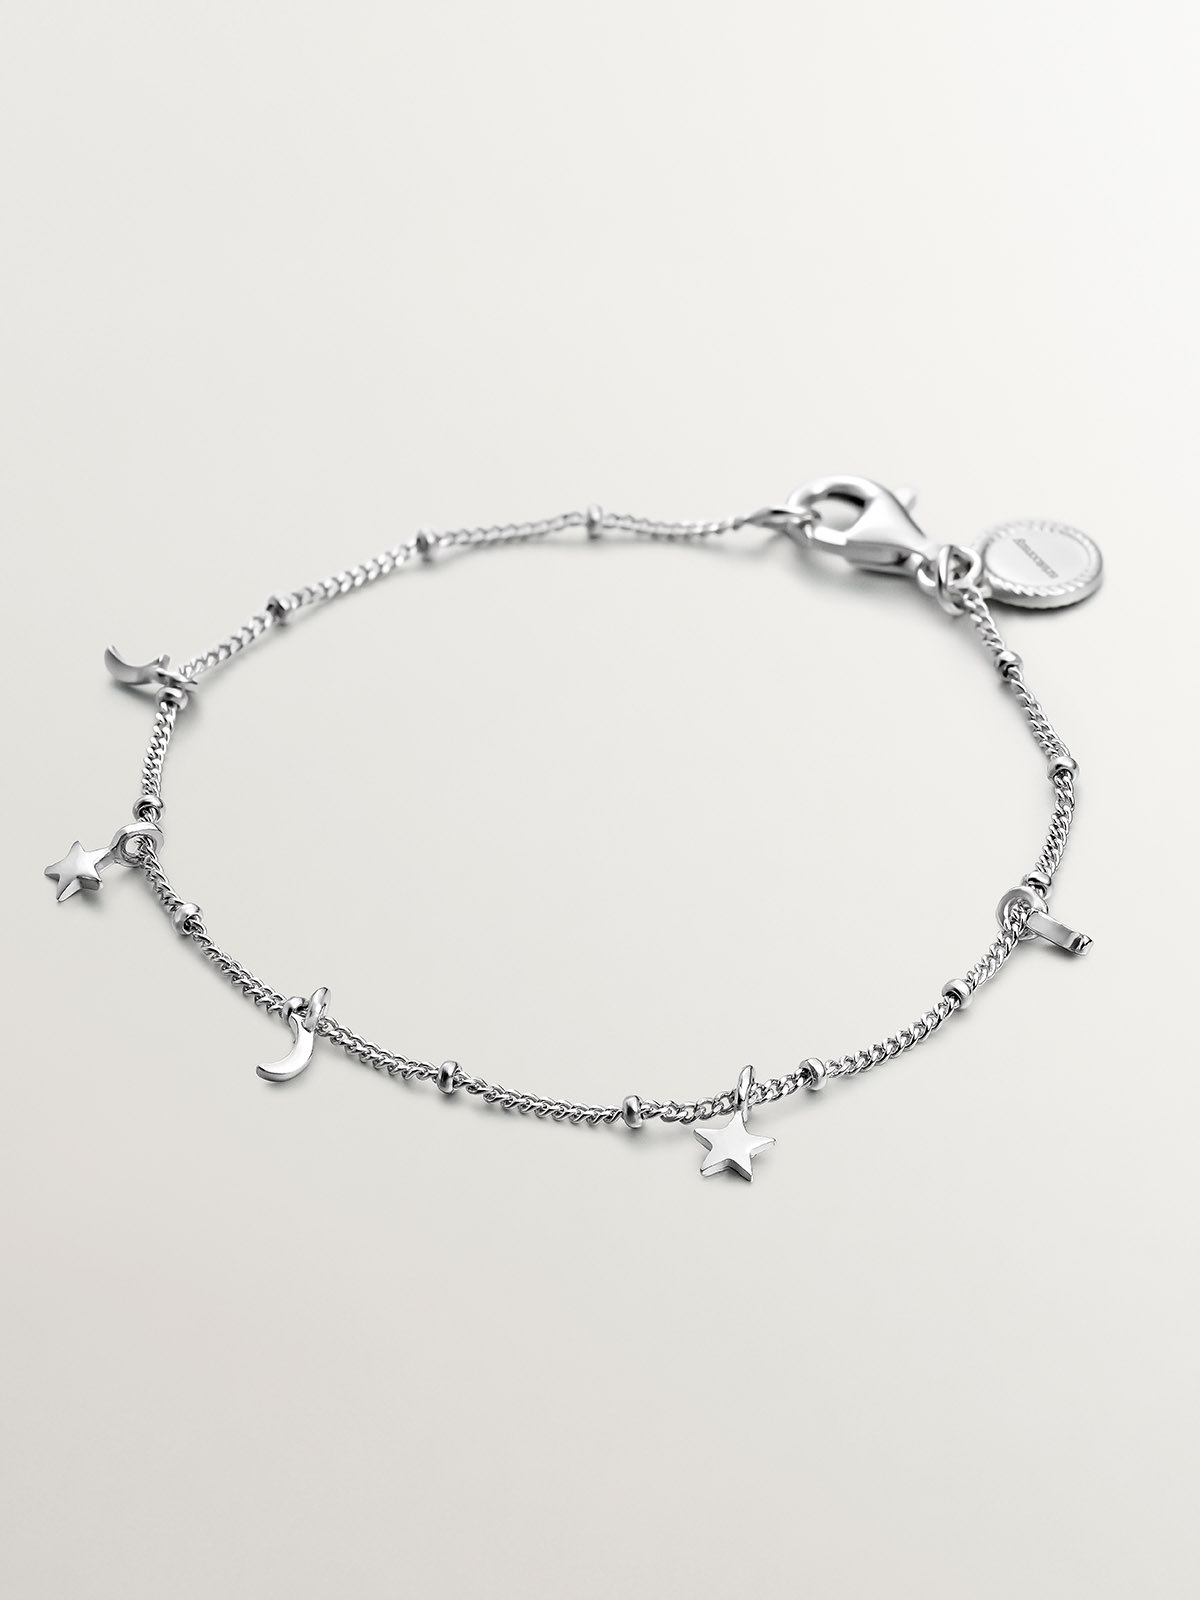 925 Silver bracelet with moons and stars